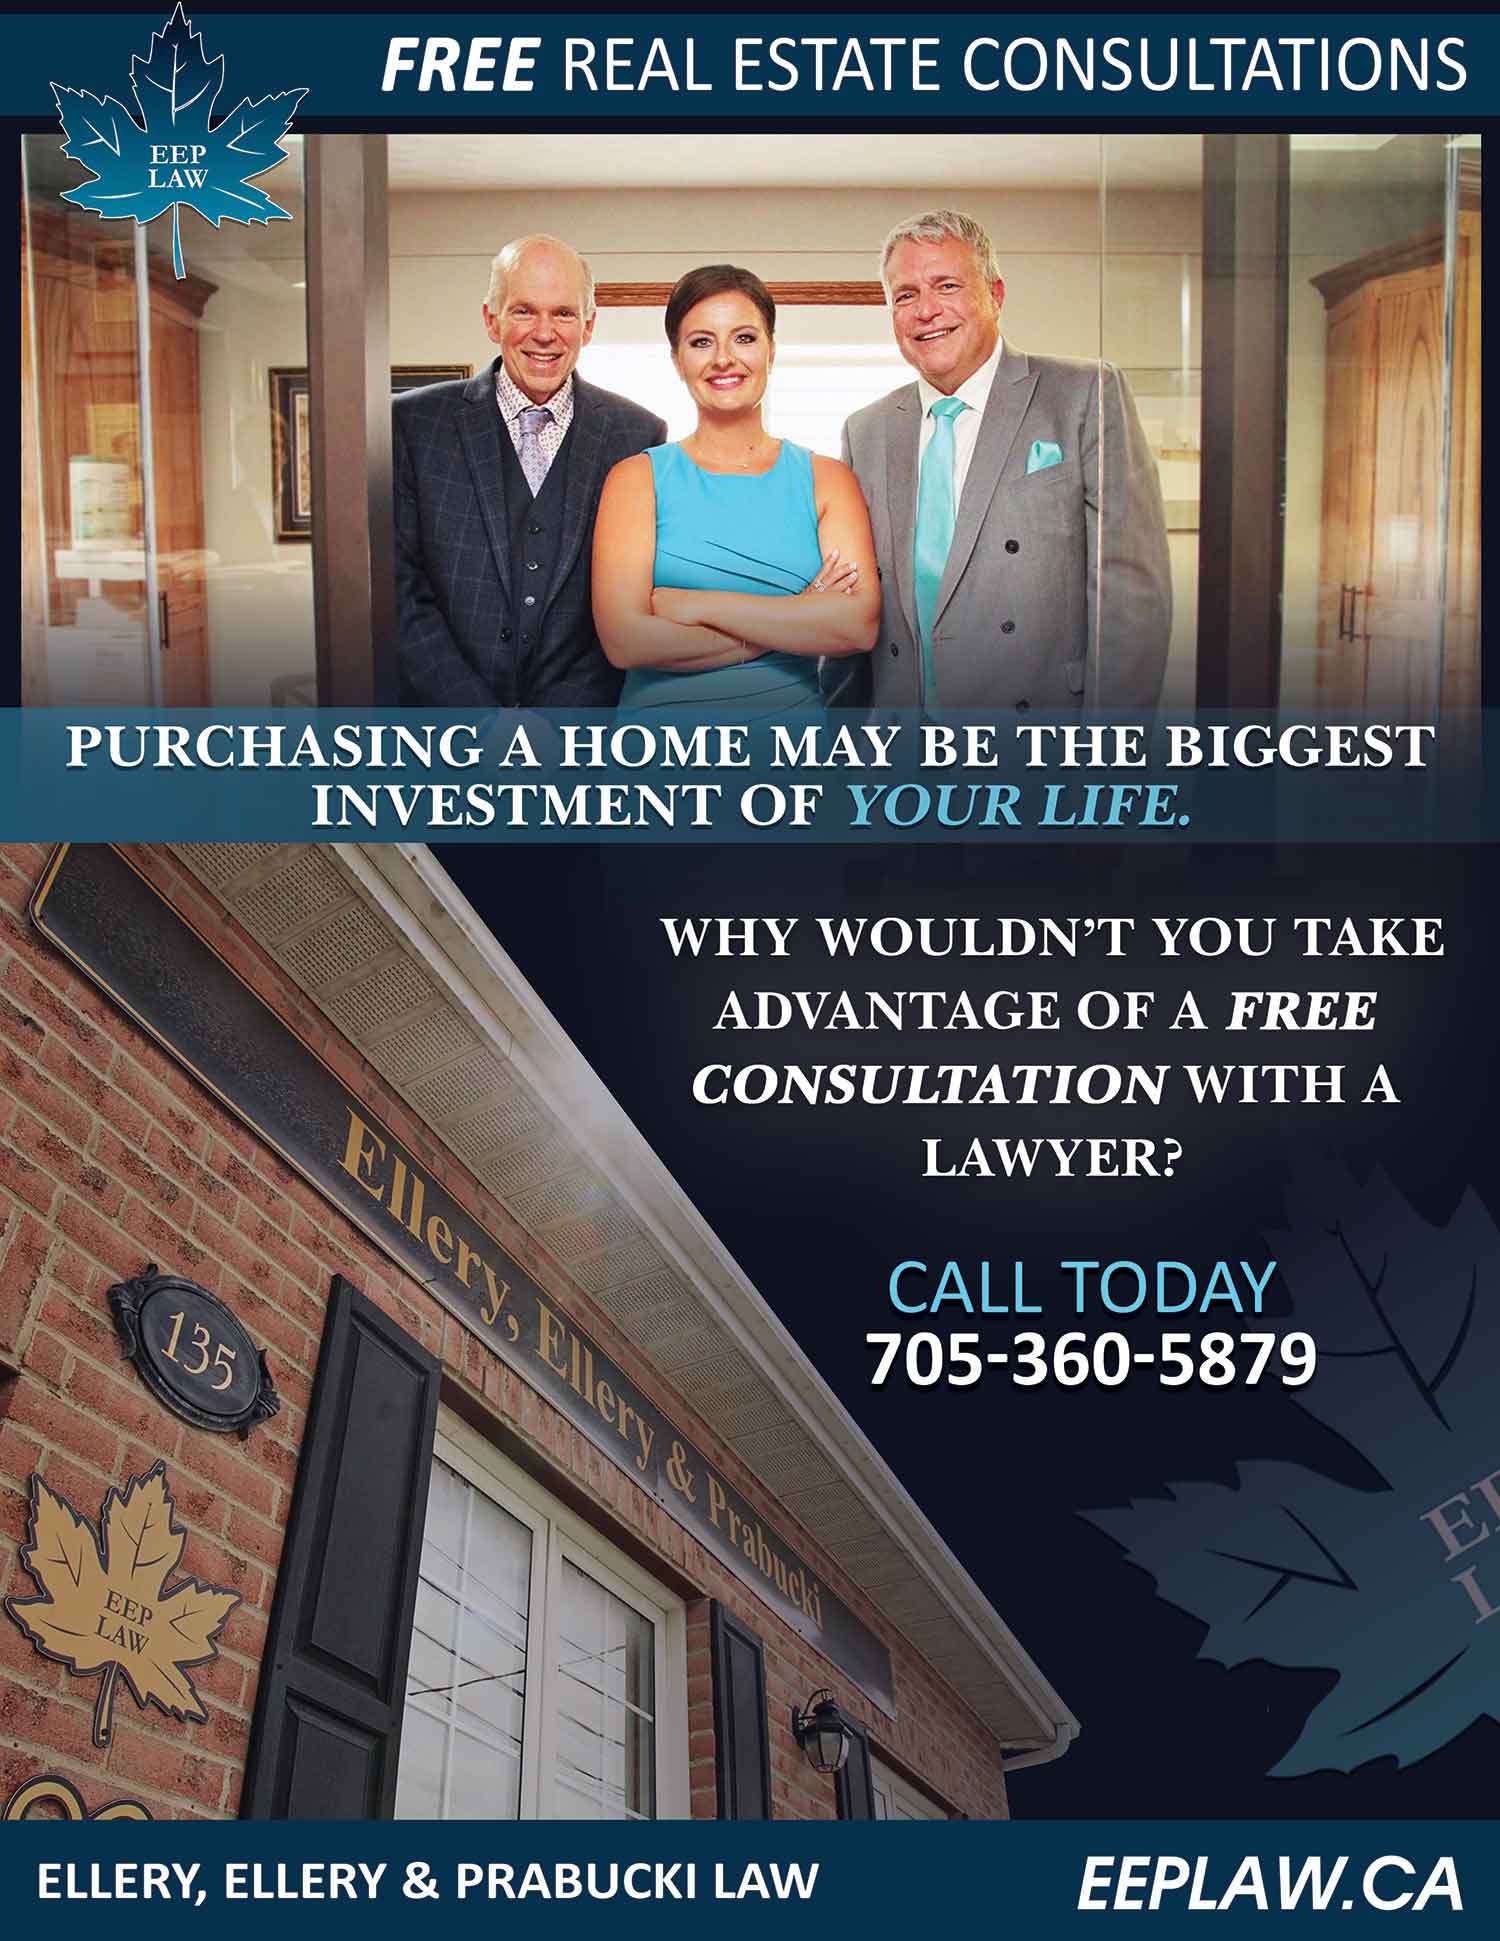 Purchasing a home may be the biggest investment of your life. Why wouldn’t you take advantage of a FREE consultation with a lawyer? Call (705) 360-5879.